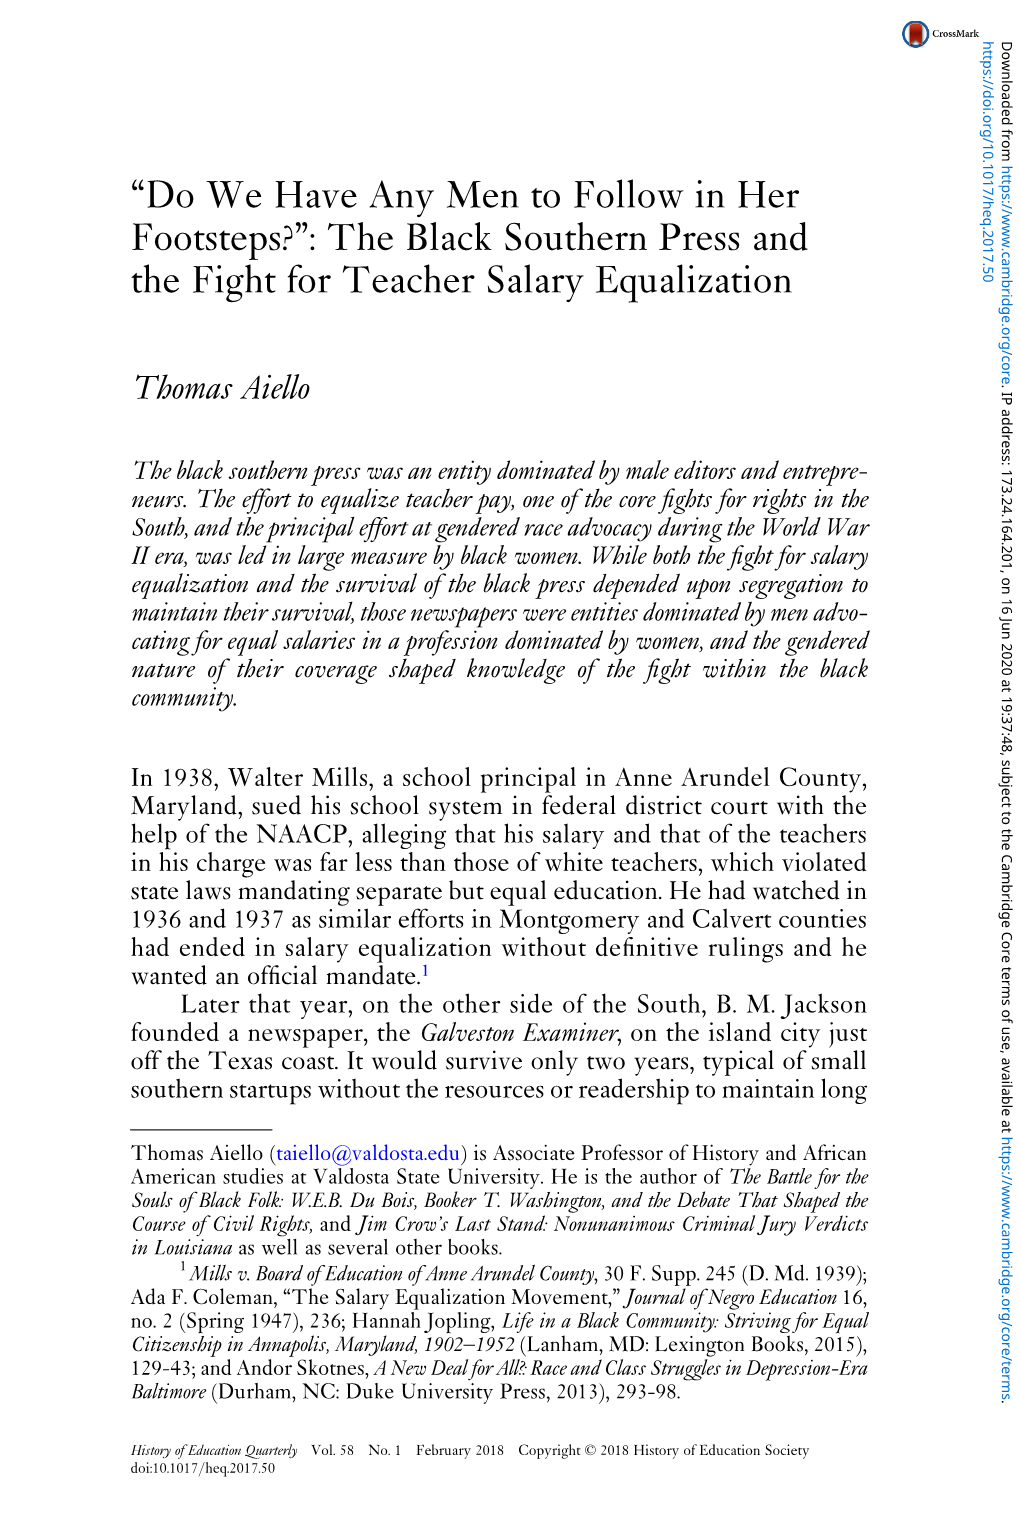 “Do We Have Any Men to Follow in Her Footsteps?”: the Black Southern Press and the Fight for Teacher Salary Equalization